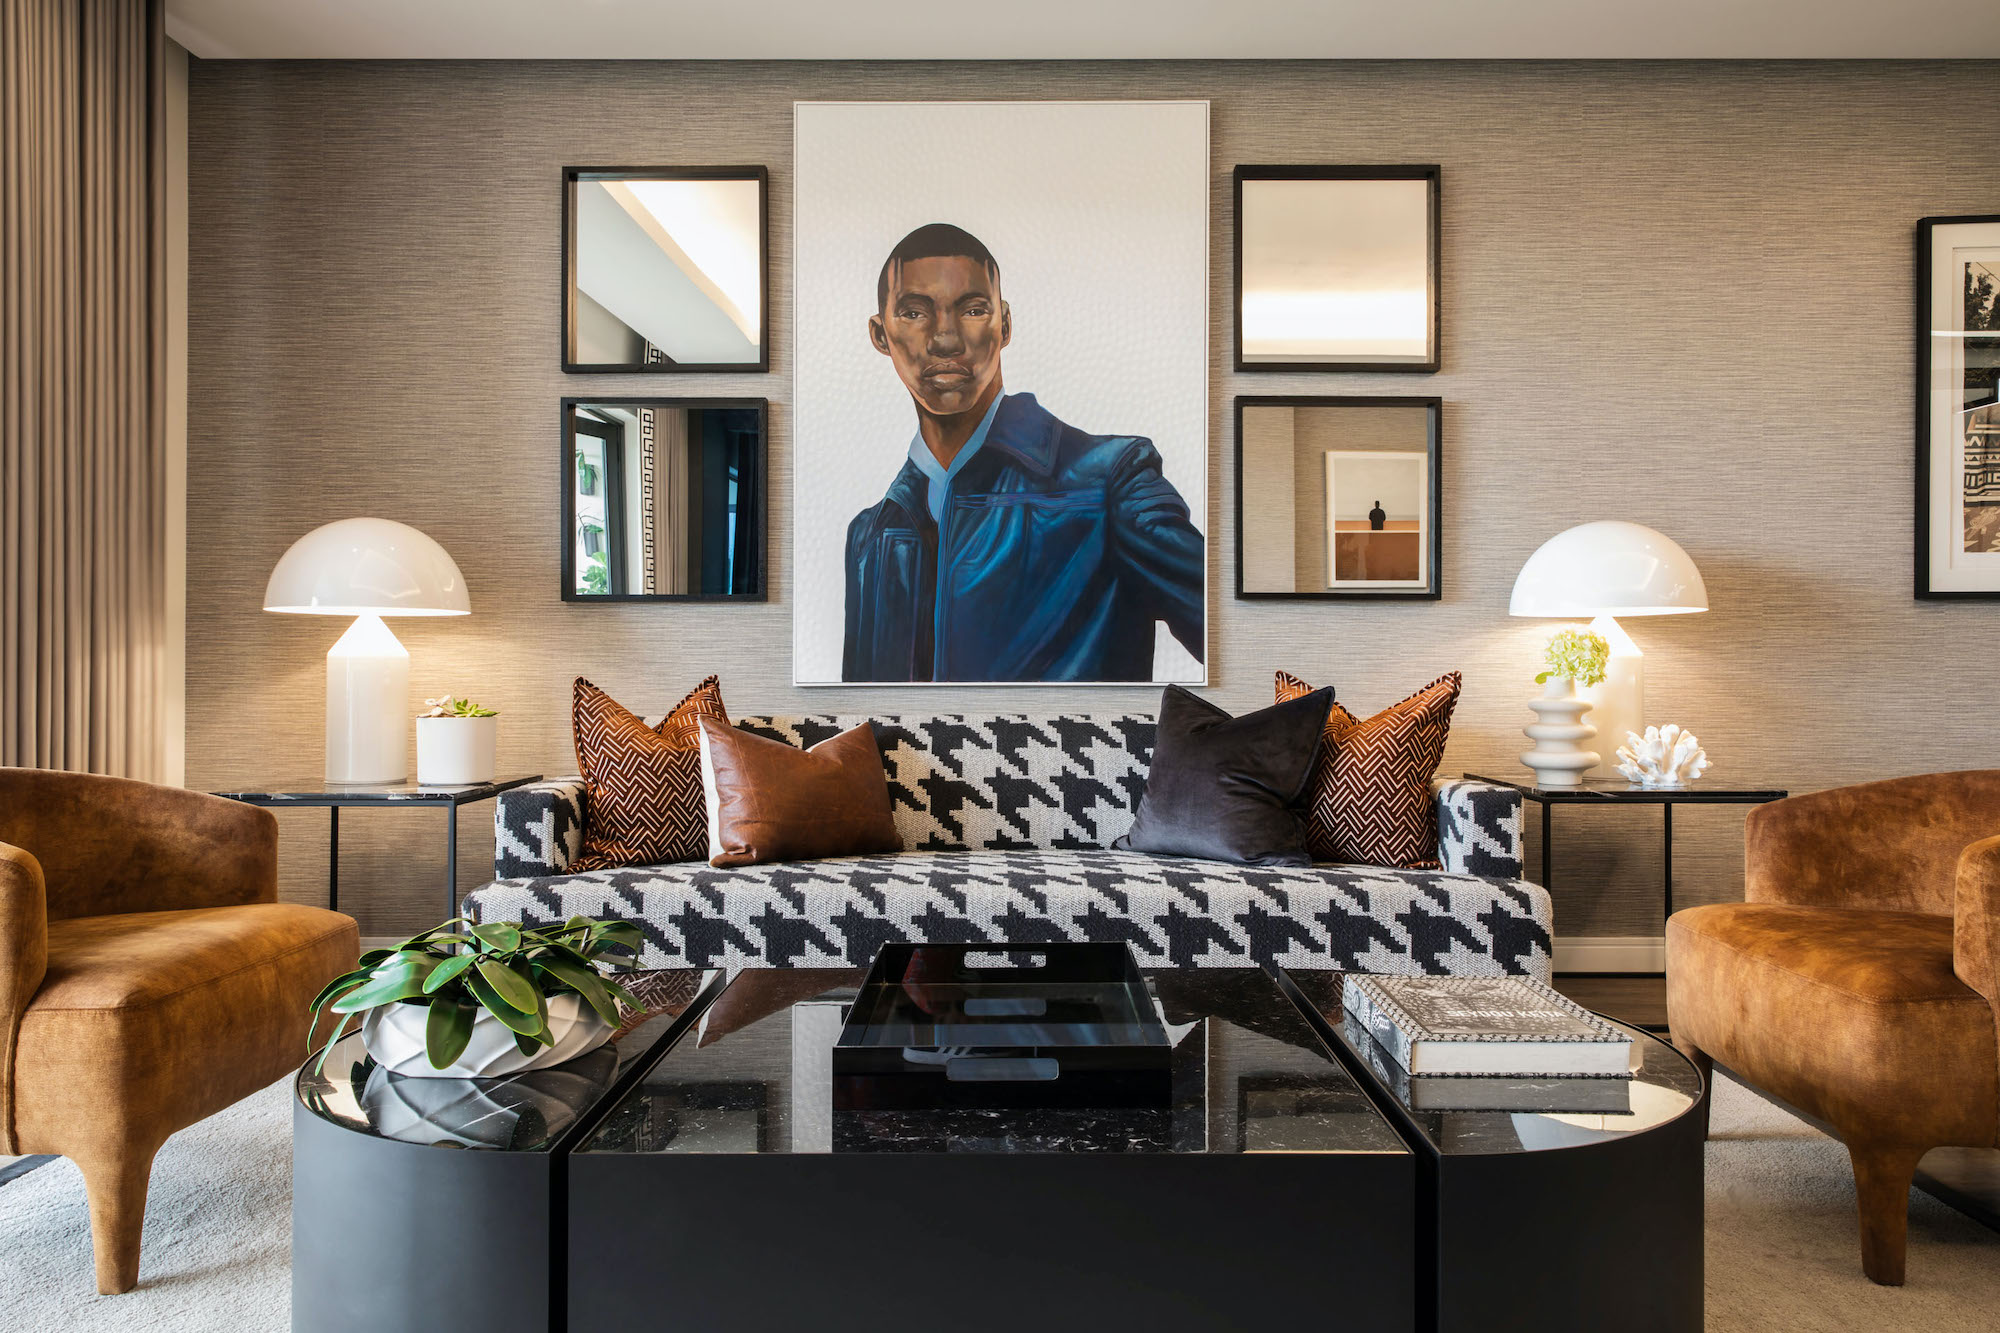 Living space by South African interior designer Donald Nxumalo - Effect Magazine